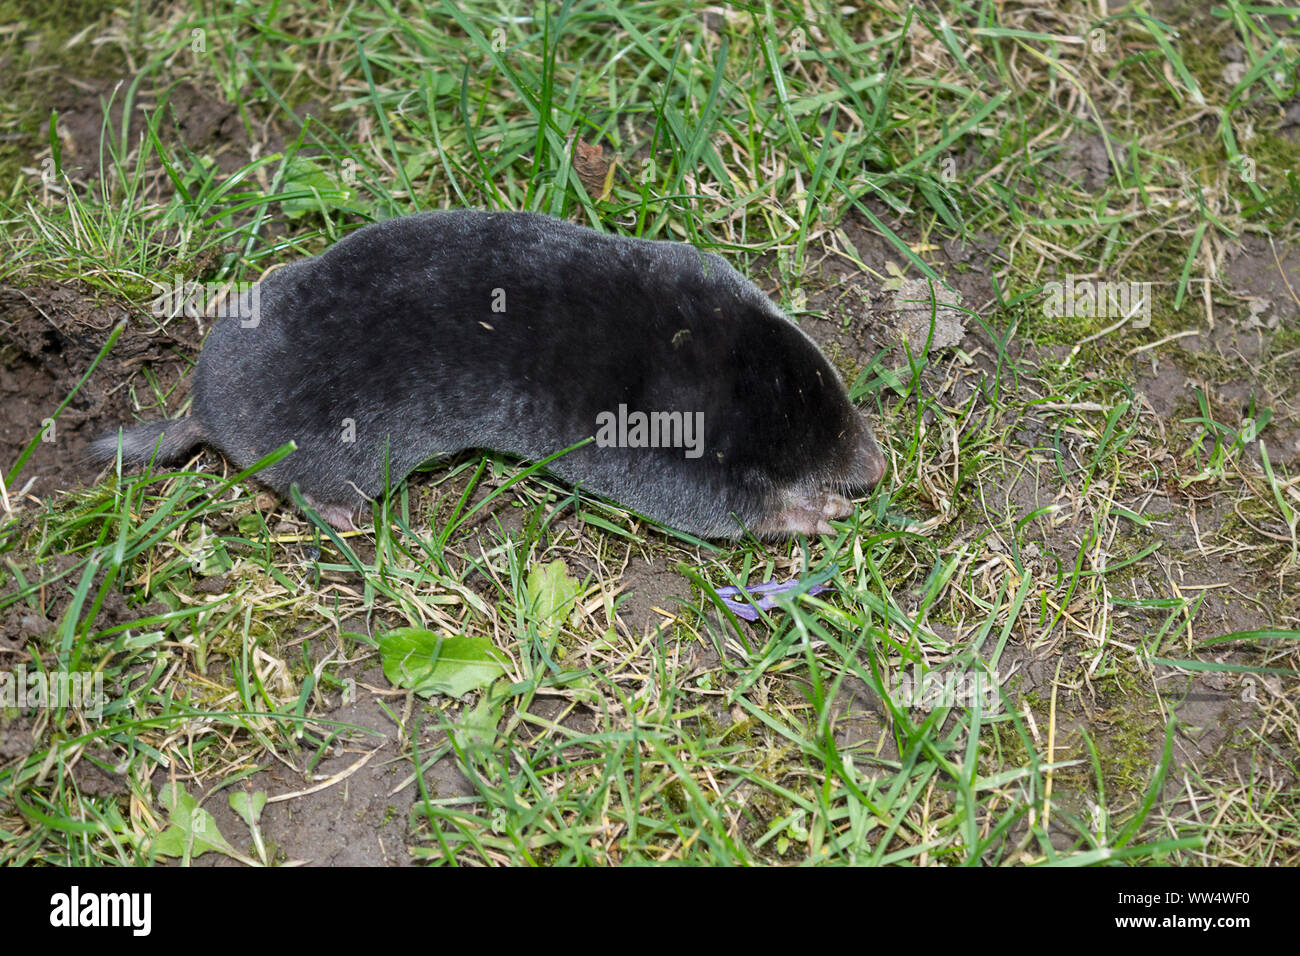 Mole (Talpa europaea) above ground searching through soft turf areas for worms. Short black dense velvety fur short tail large front claws short legs Stock Photo